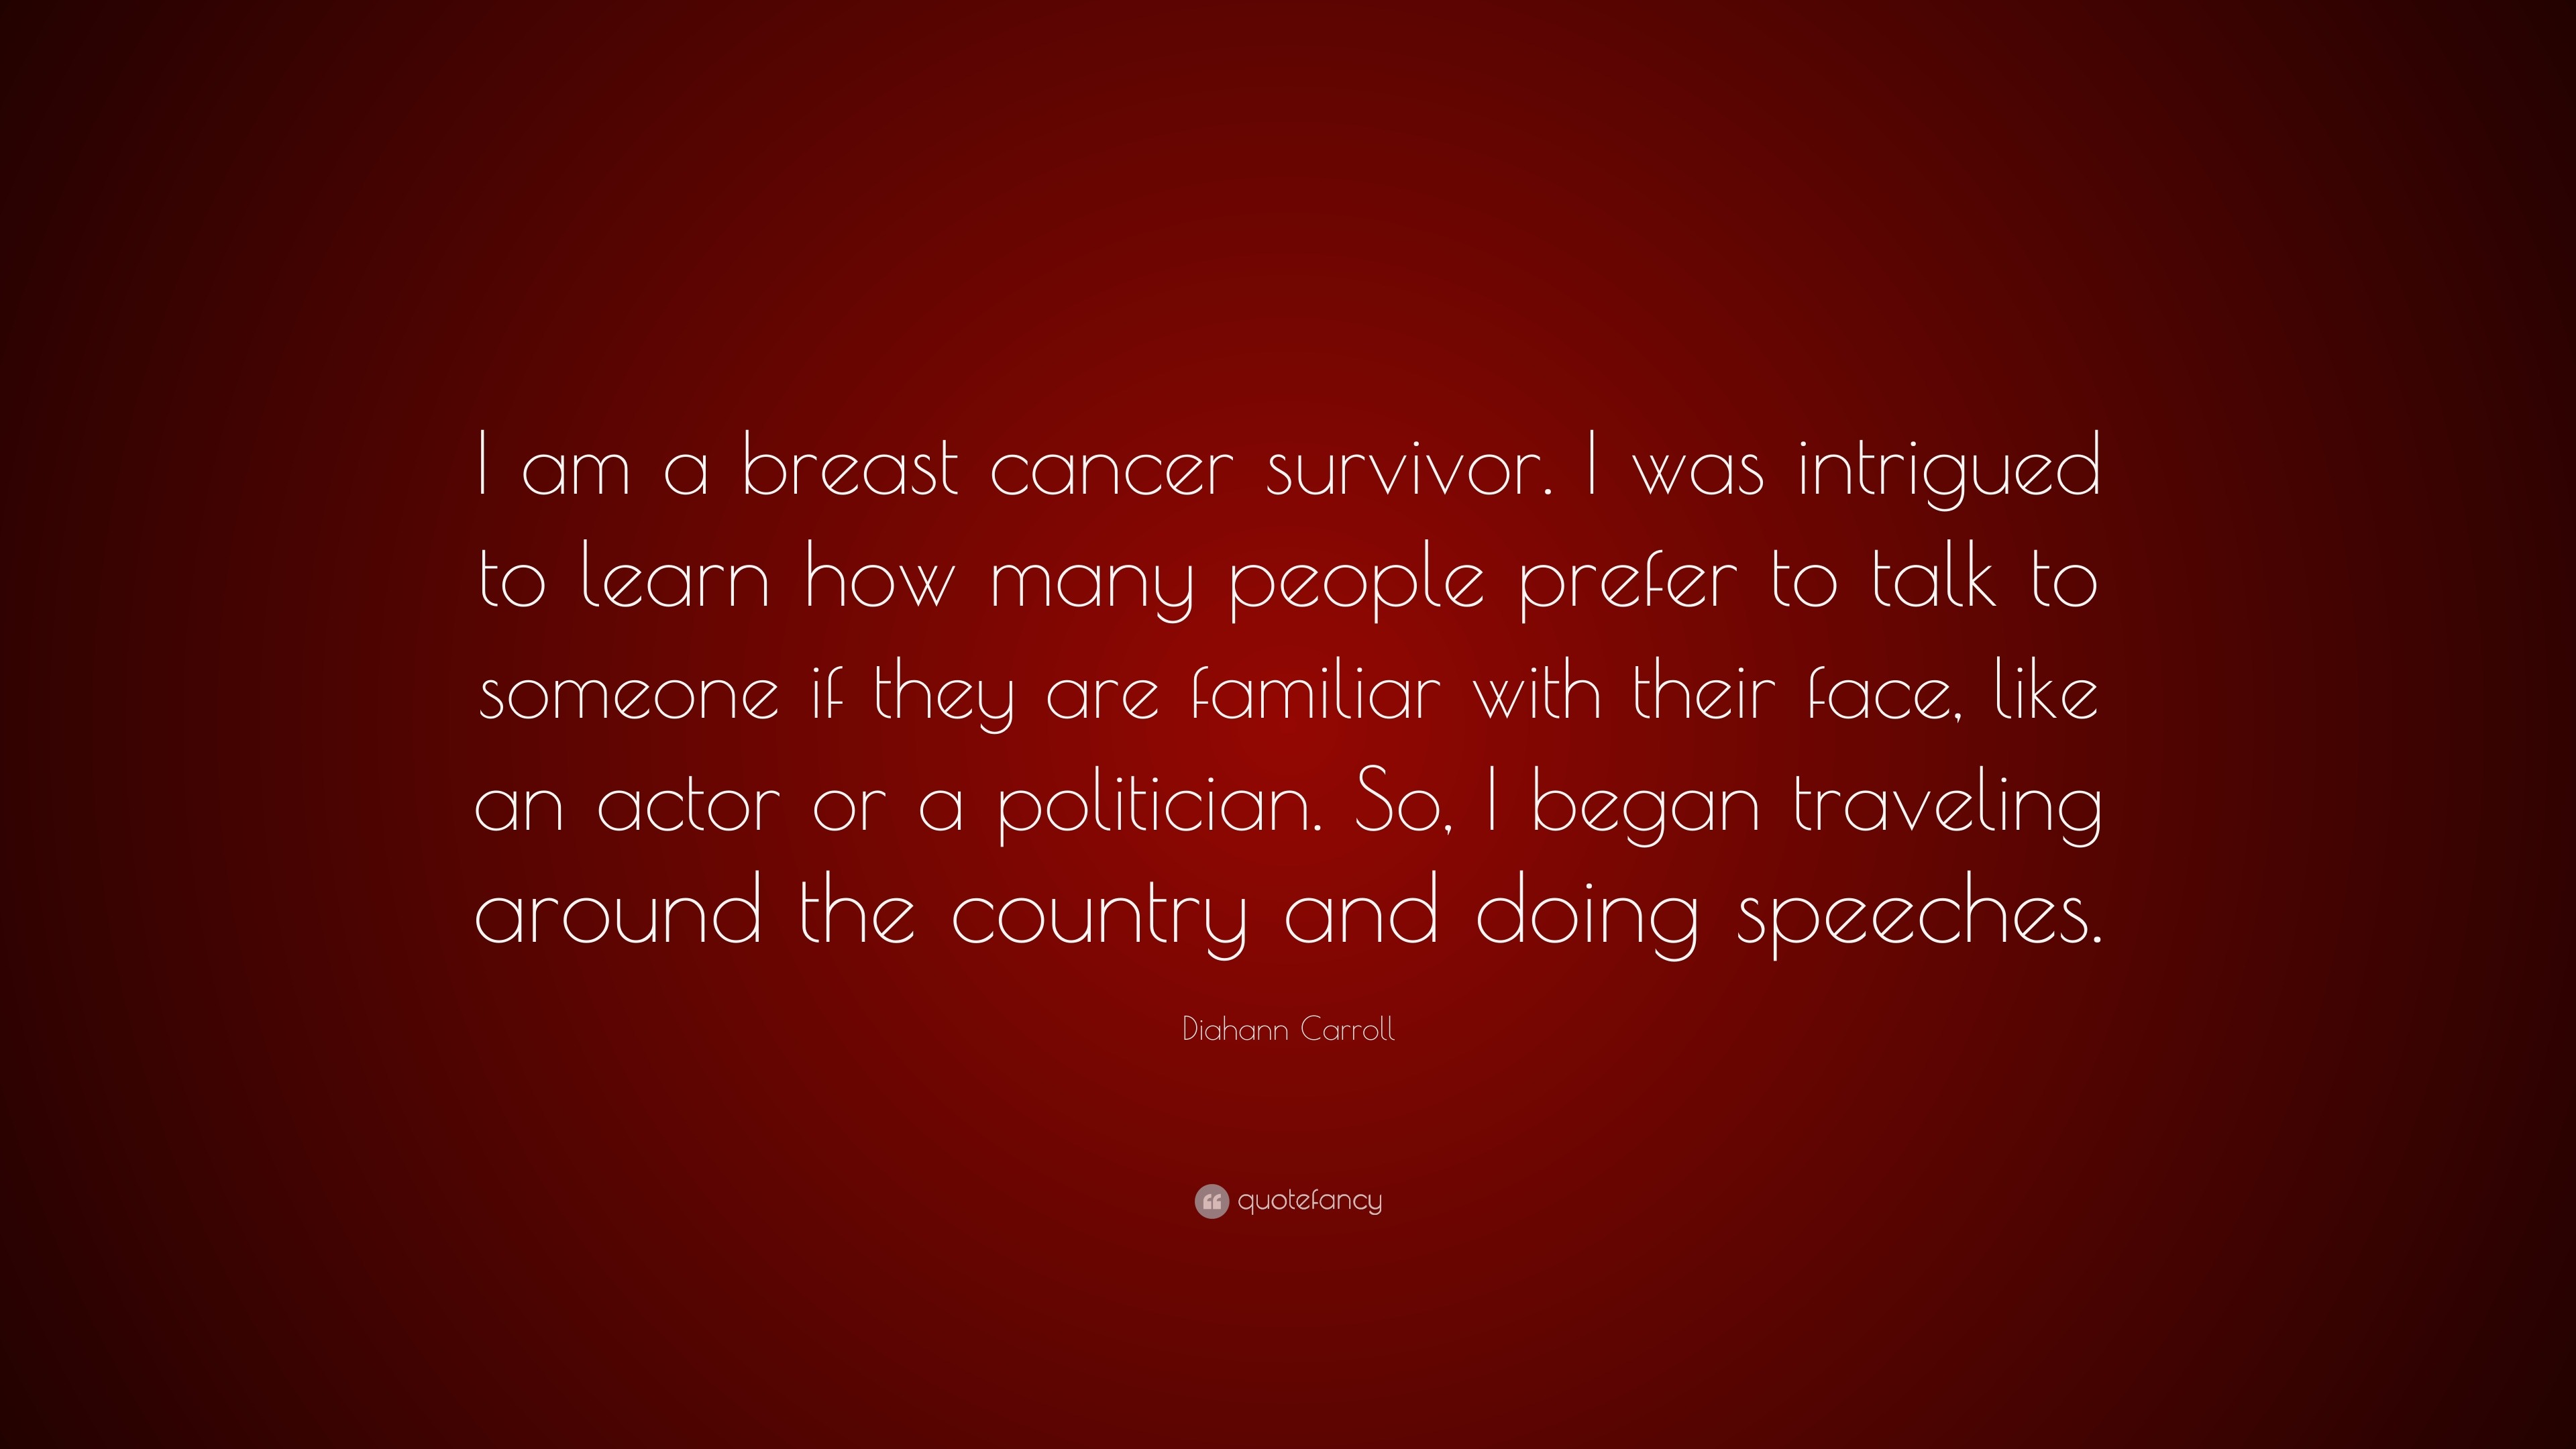 WhyMommy Breaks Hearts in Breast Cancer Speech